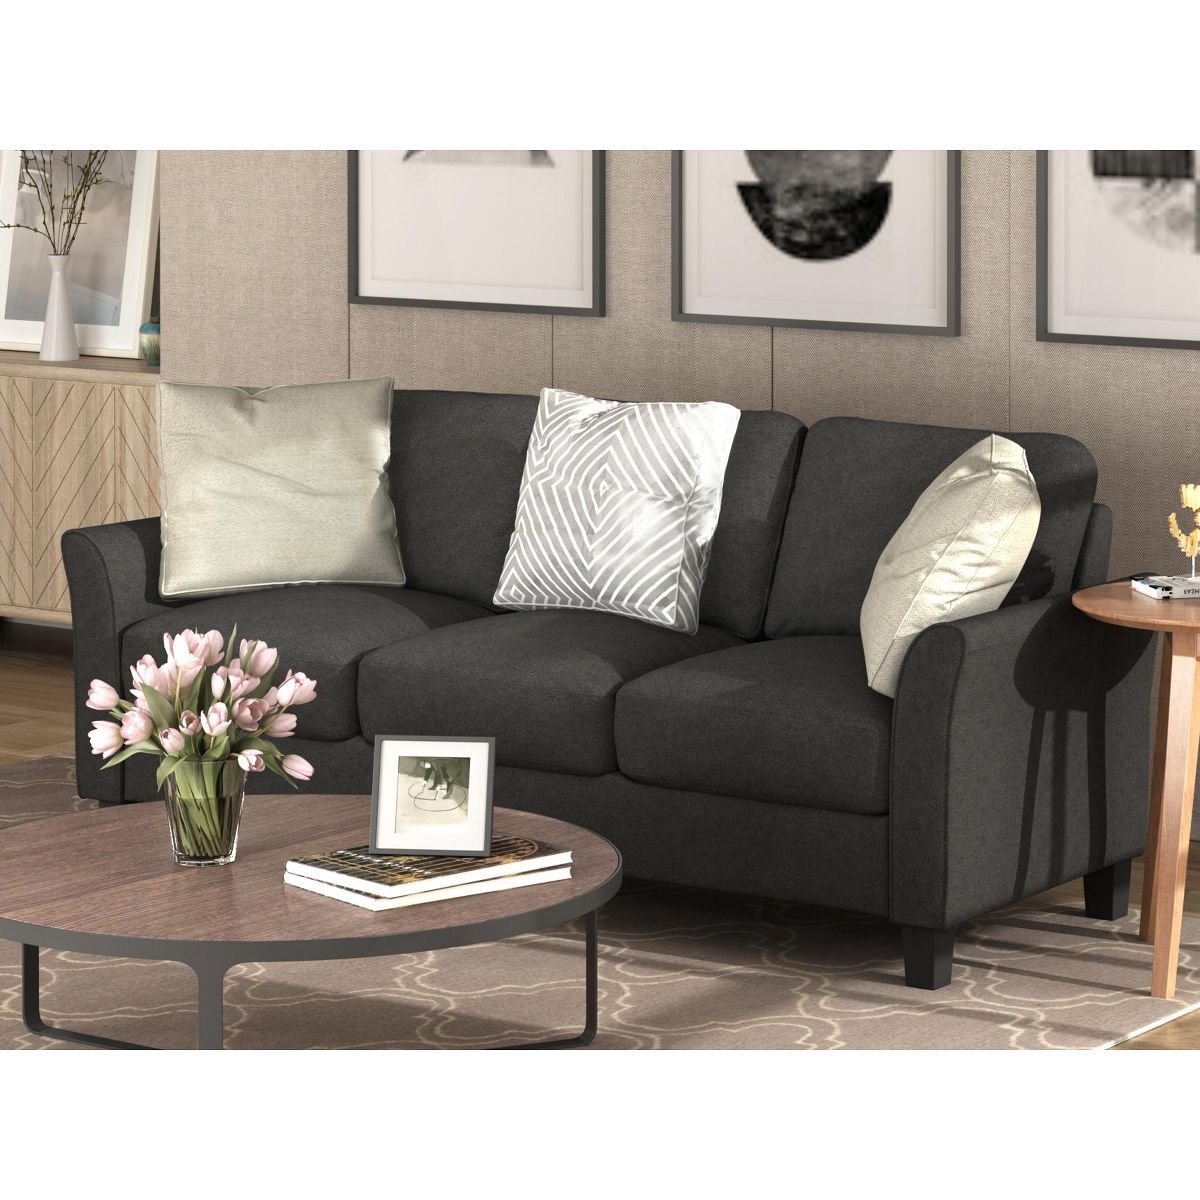 Elegant Upholstered 3 Seat/Loveseat/1 Seat Sofa Couches with Armrests 4A - ModernLuxe | Target